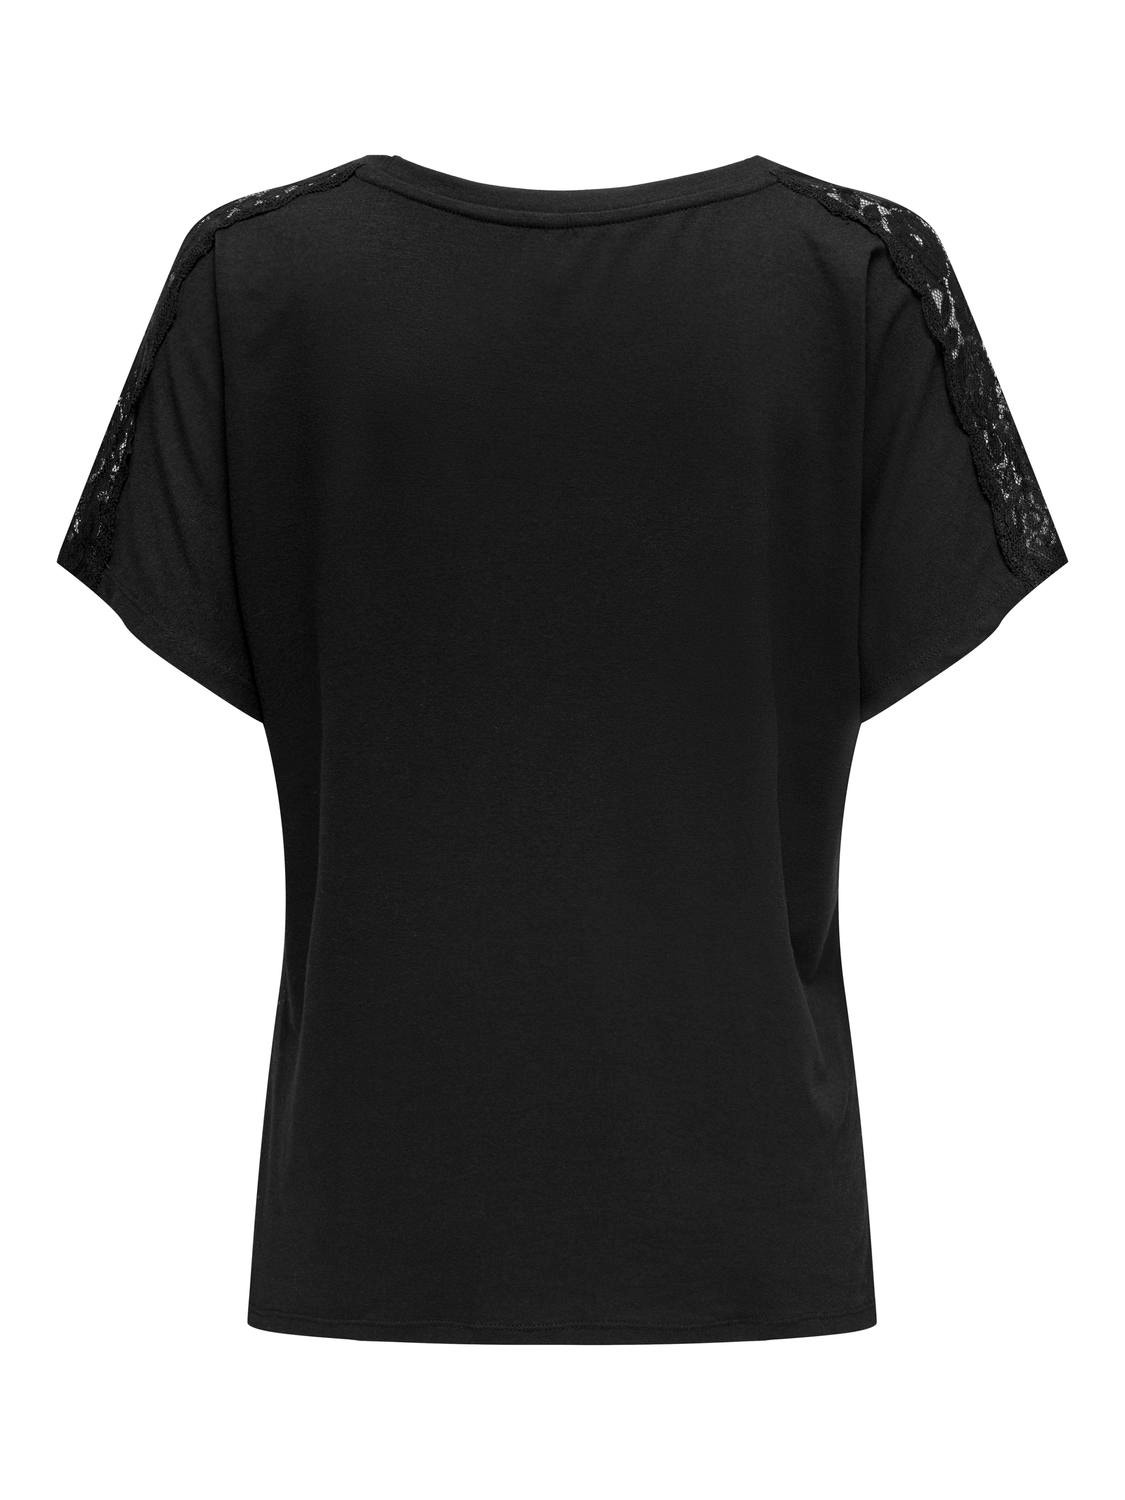 ONLY v-neck top with lace -Black - 15302877